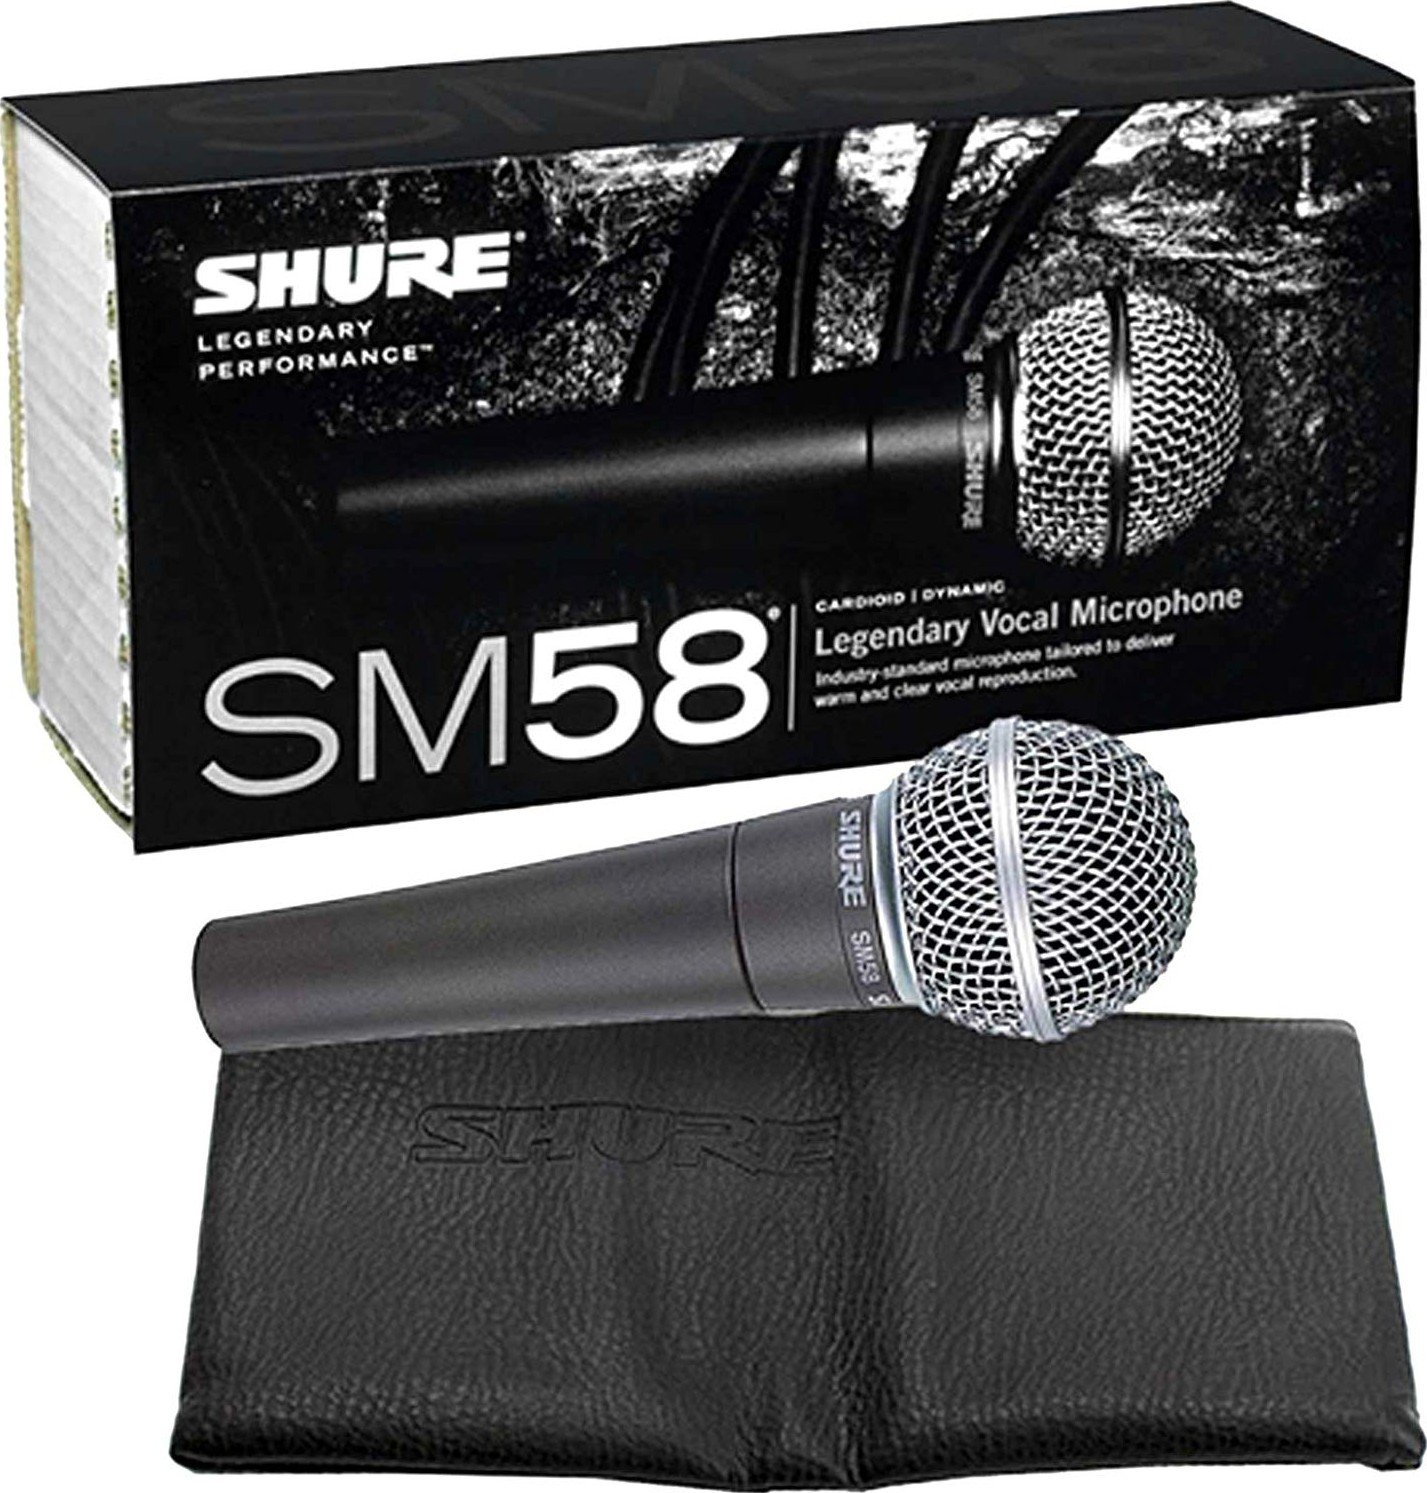 Shure SM58 Legendary Unidirectional Cardioid Dynamic Pro Vocal Microphone